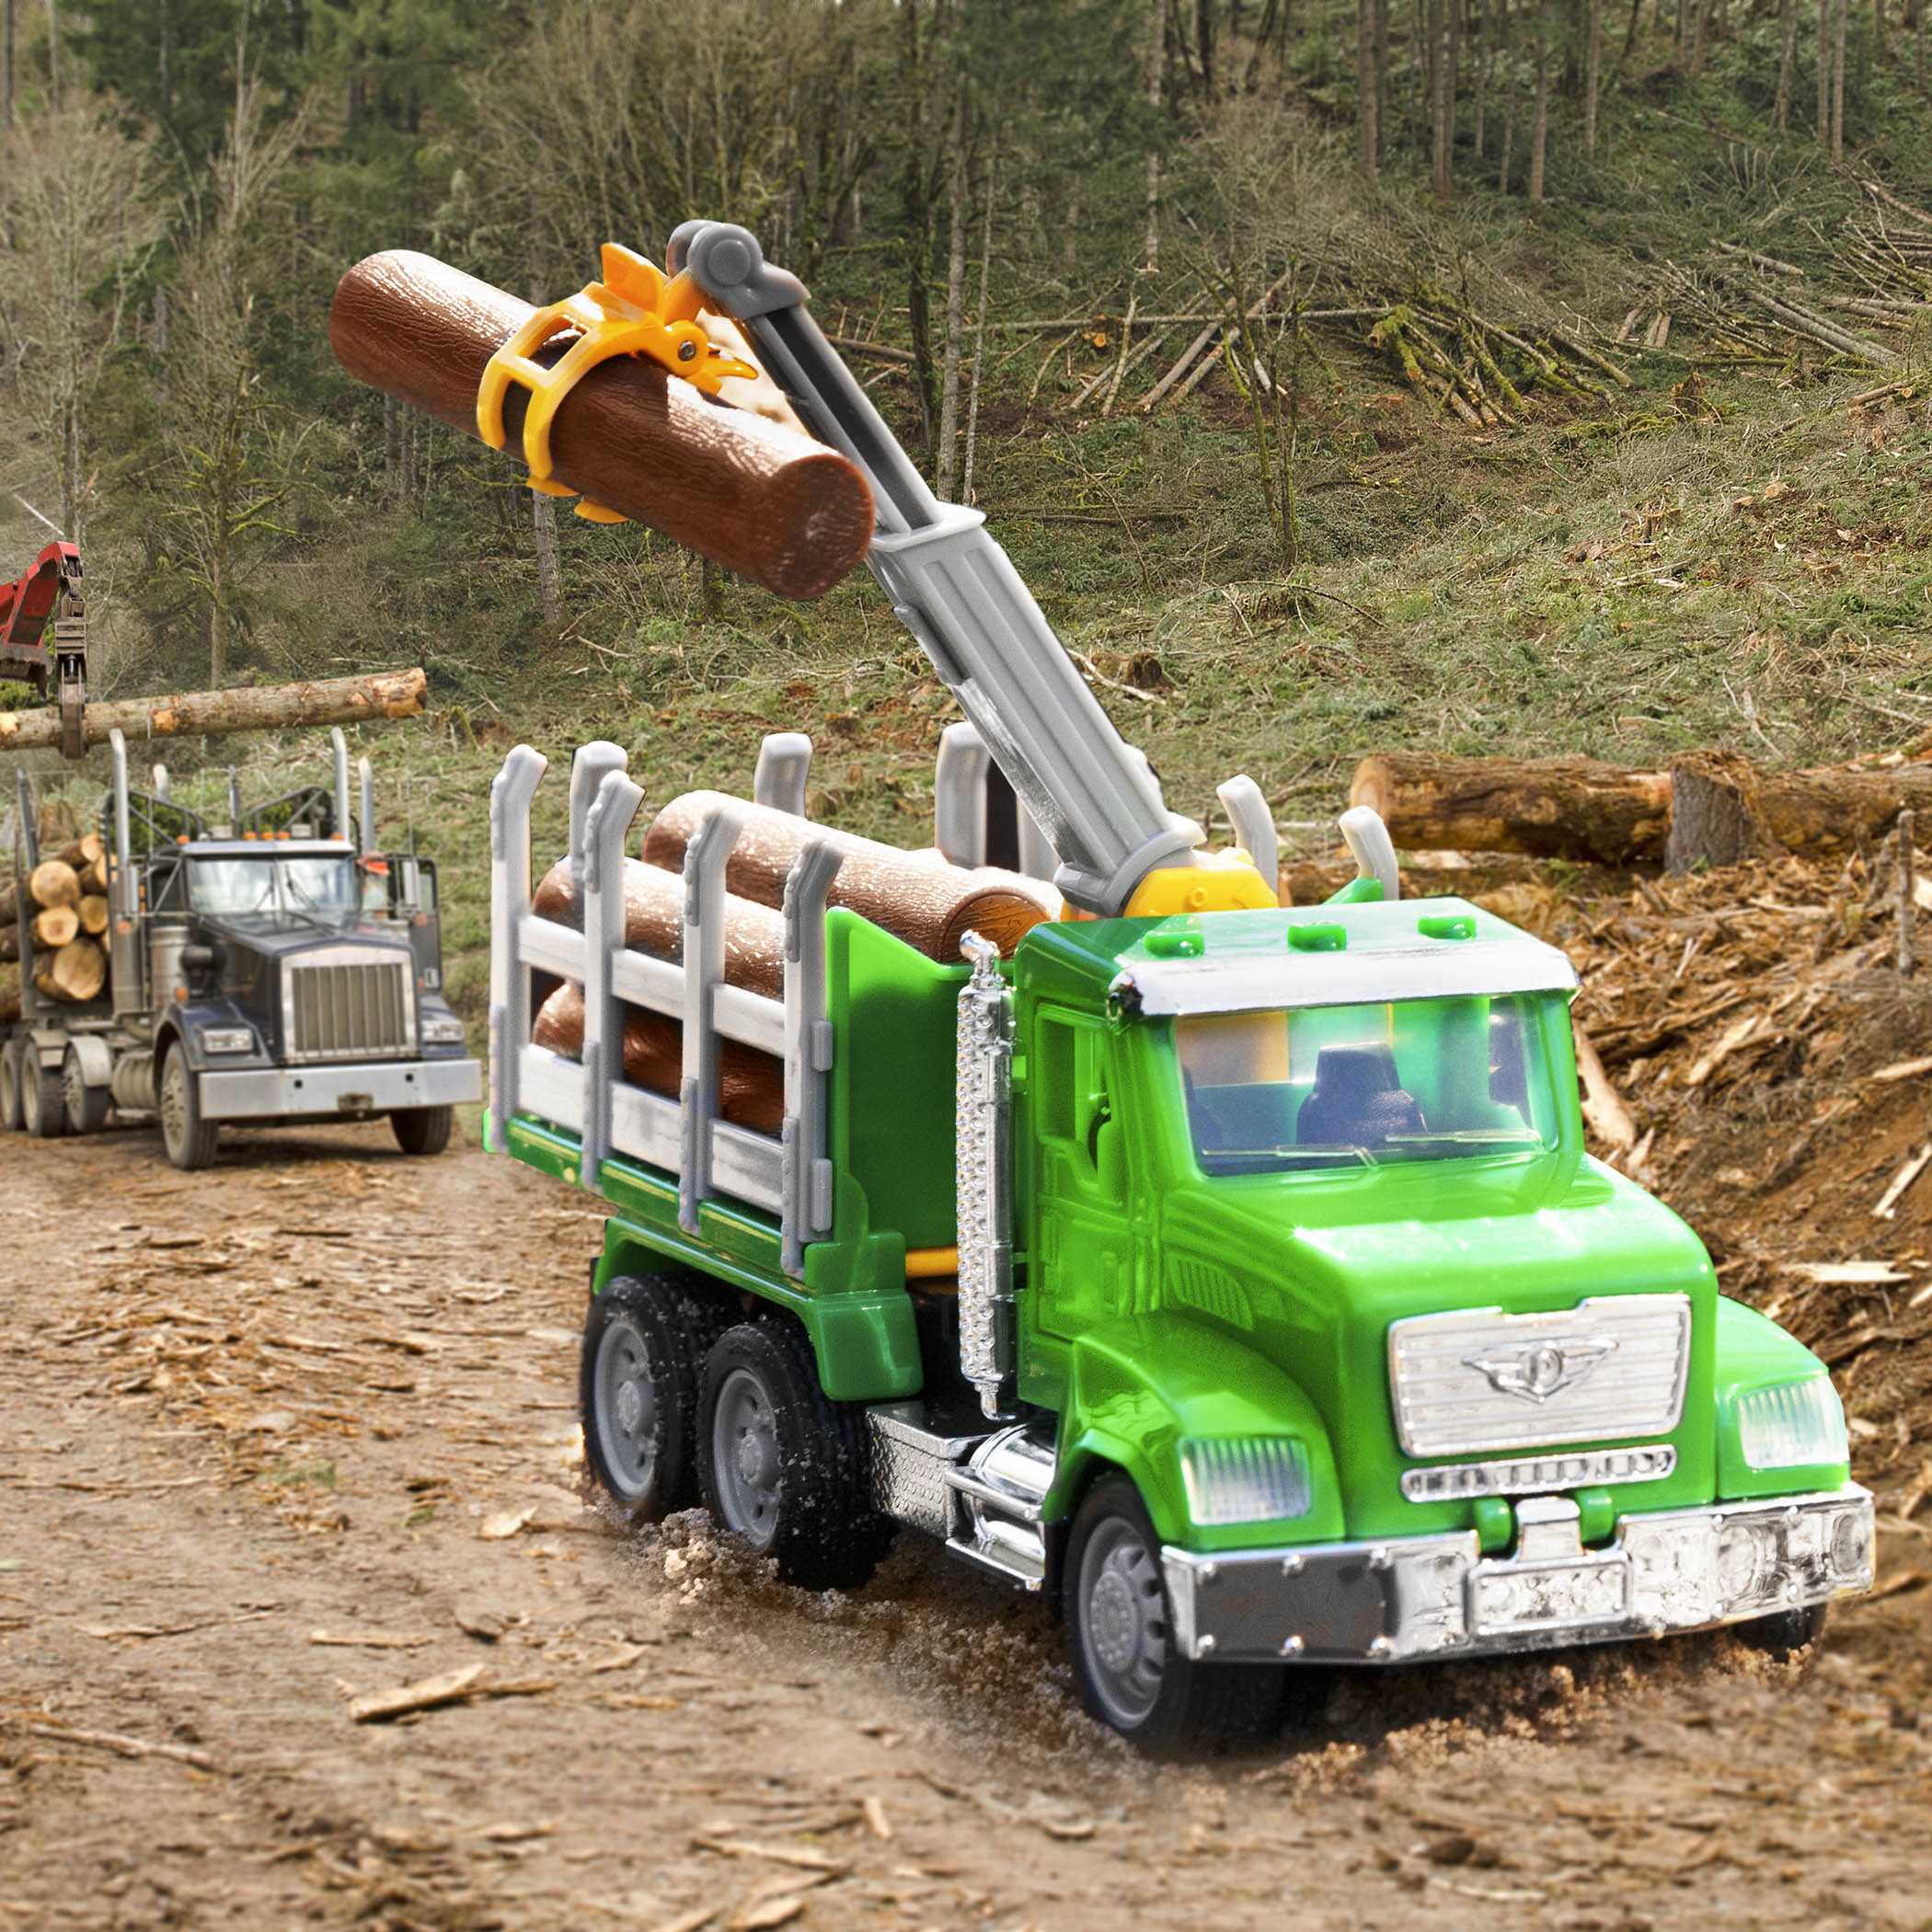 Micro Logging Truck - Small Green Toy Timber Truck - Driven